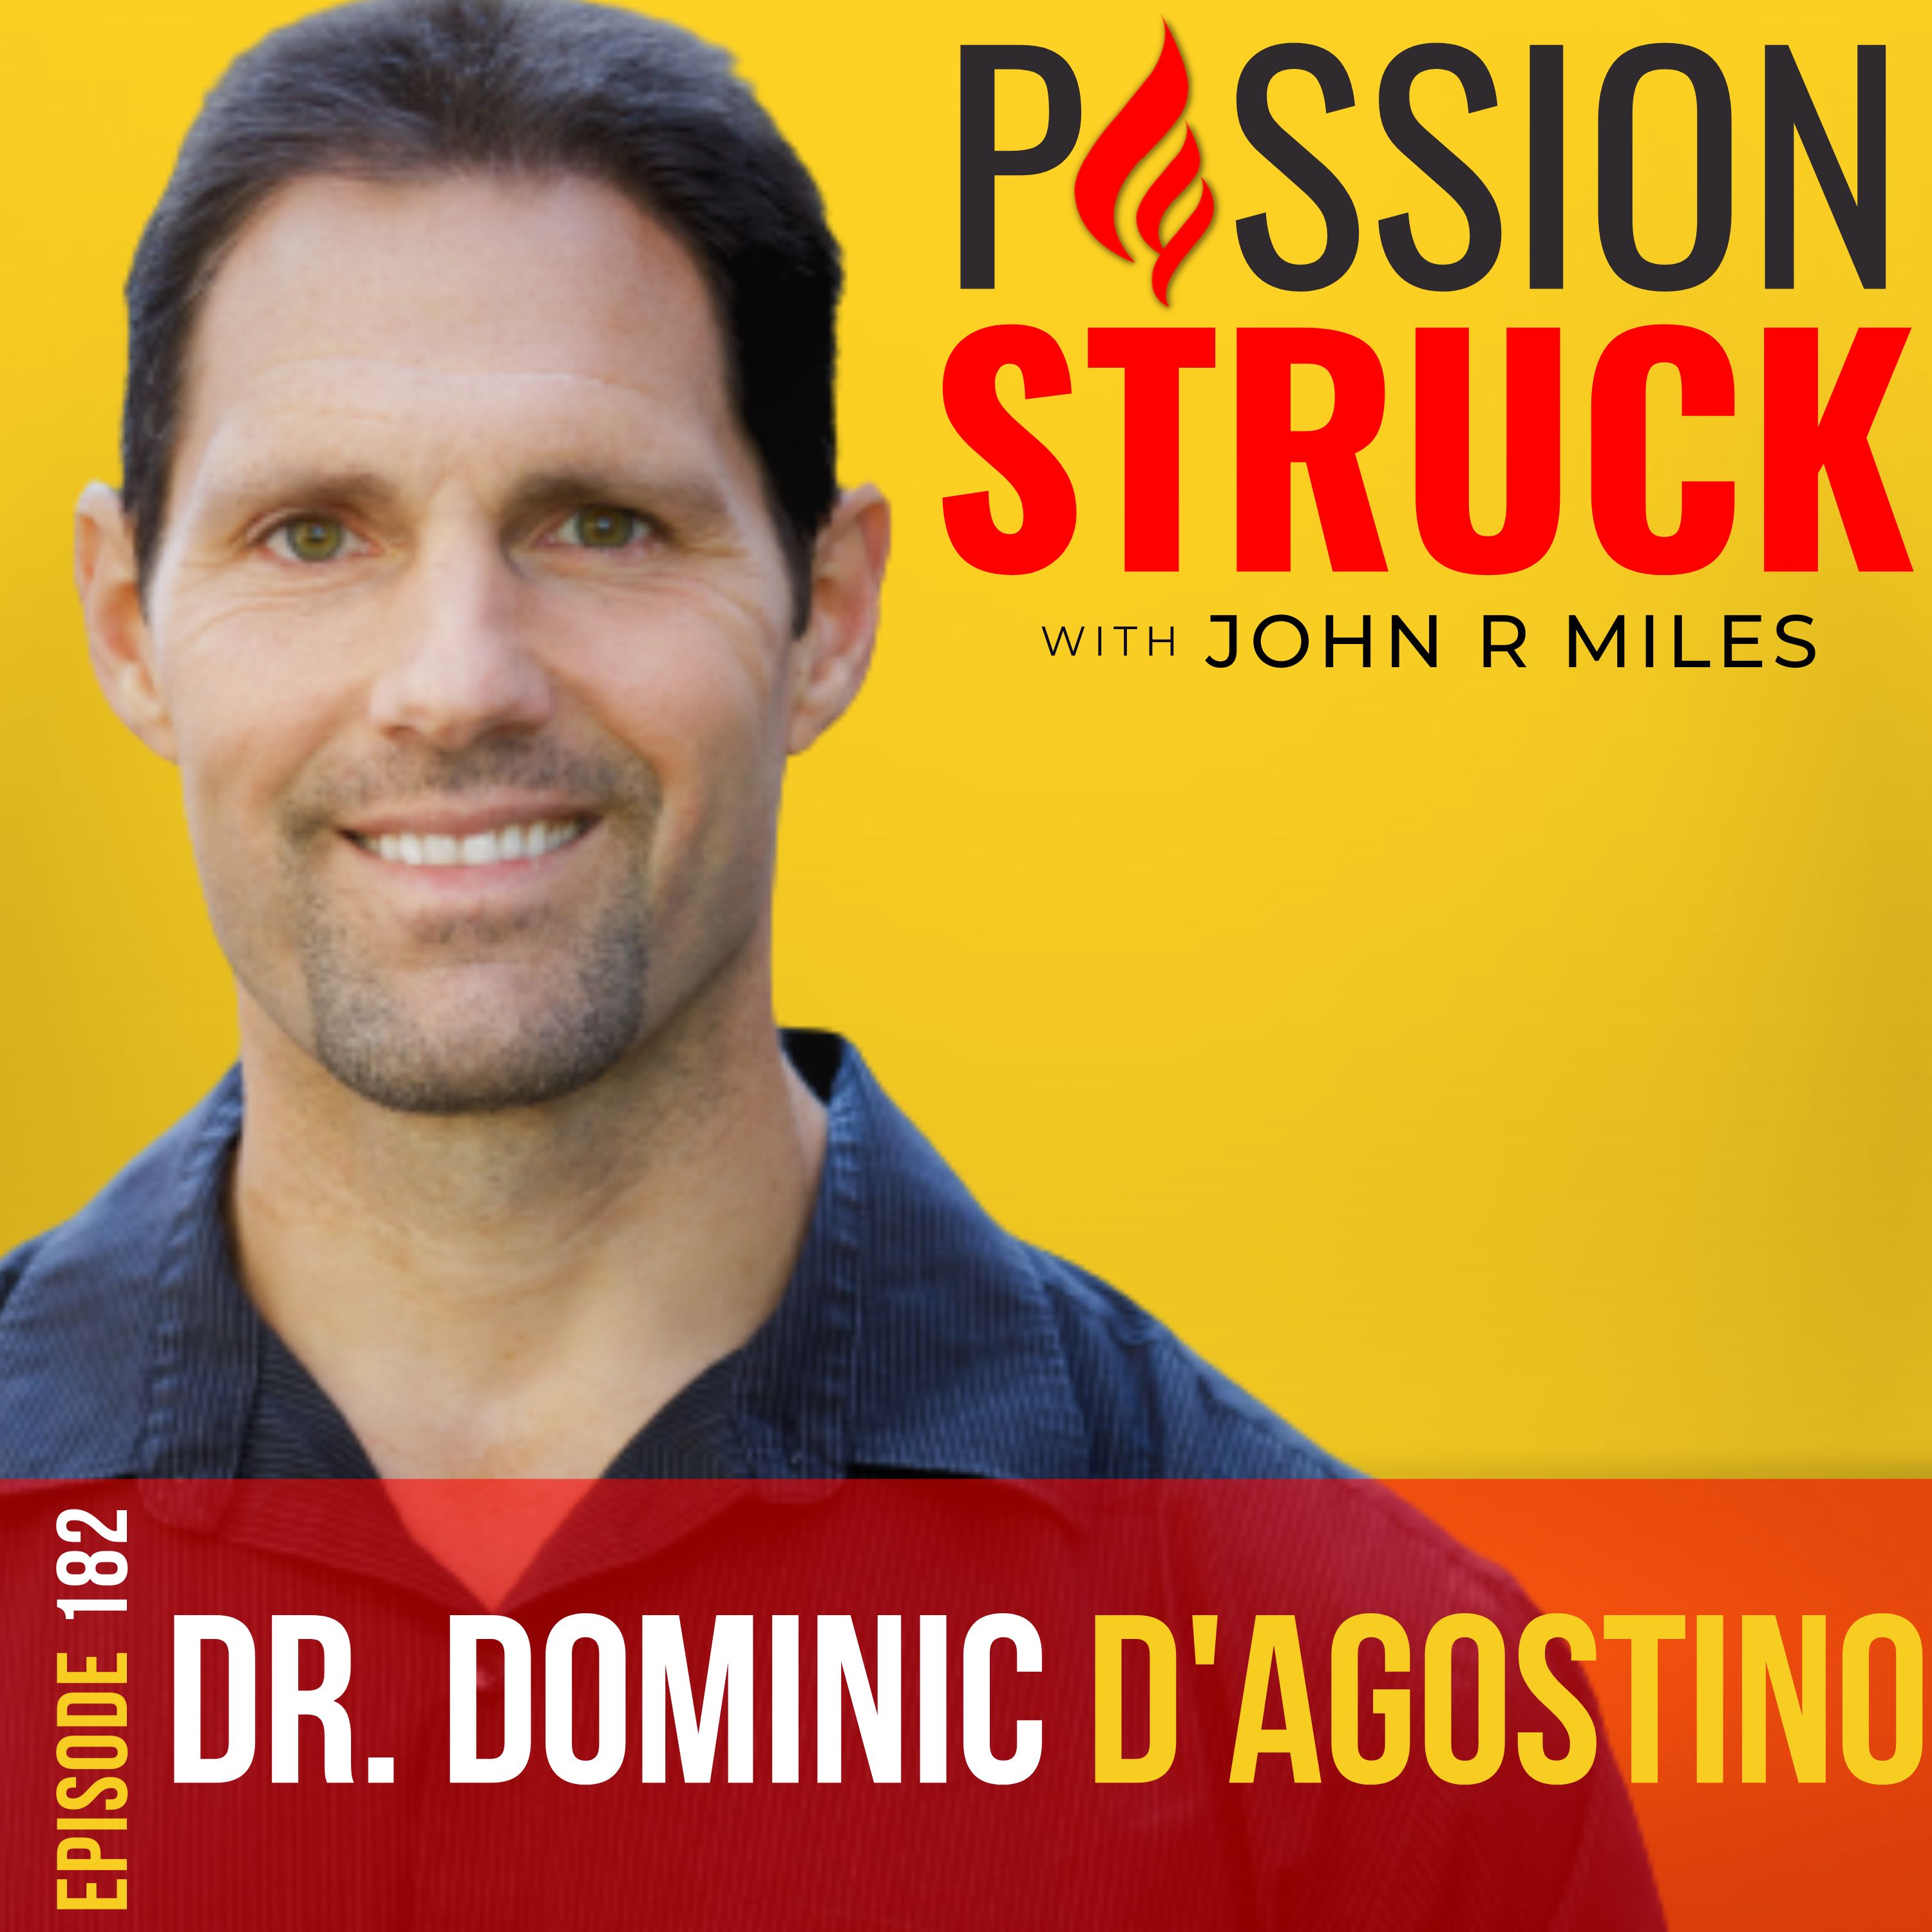 Passion Struck with John R. Miles album cover episode 182 with Dr. Dominic D'Agostino on the ketogenic diet